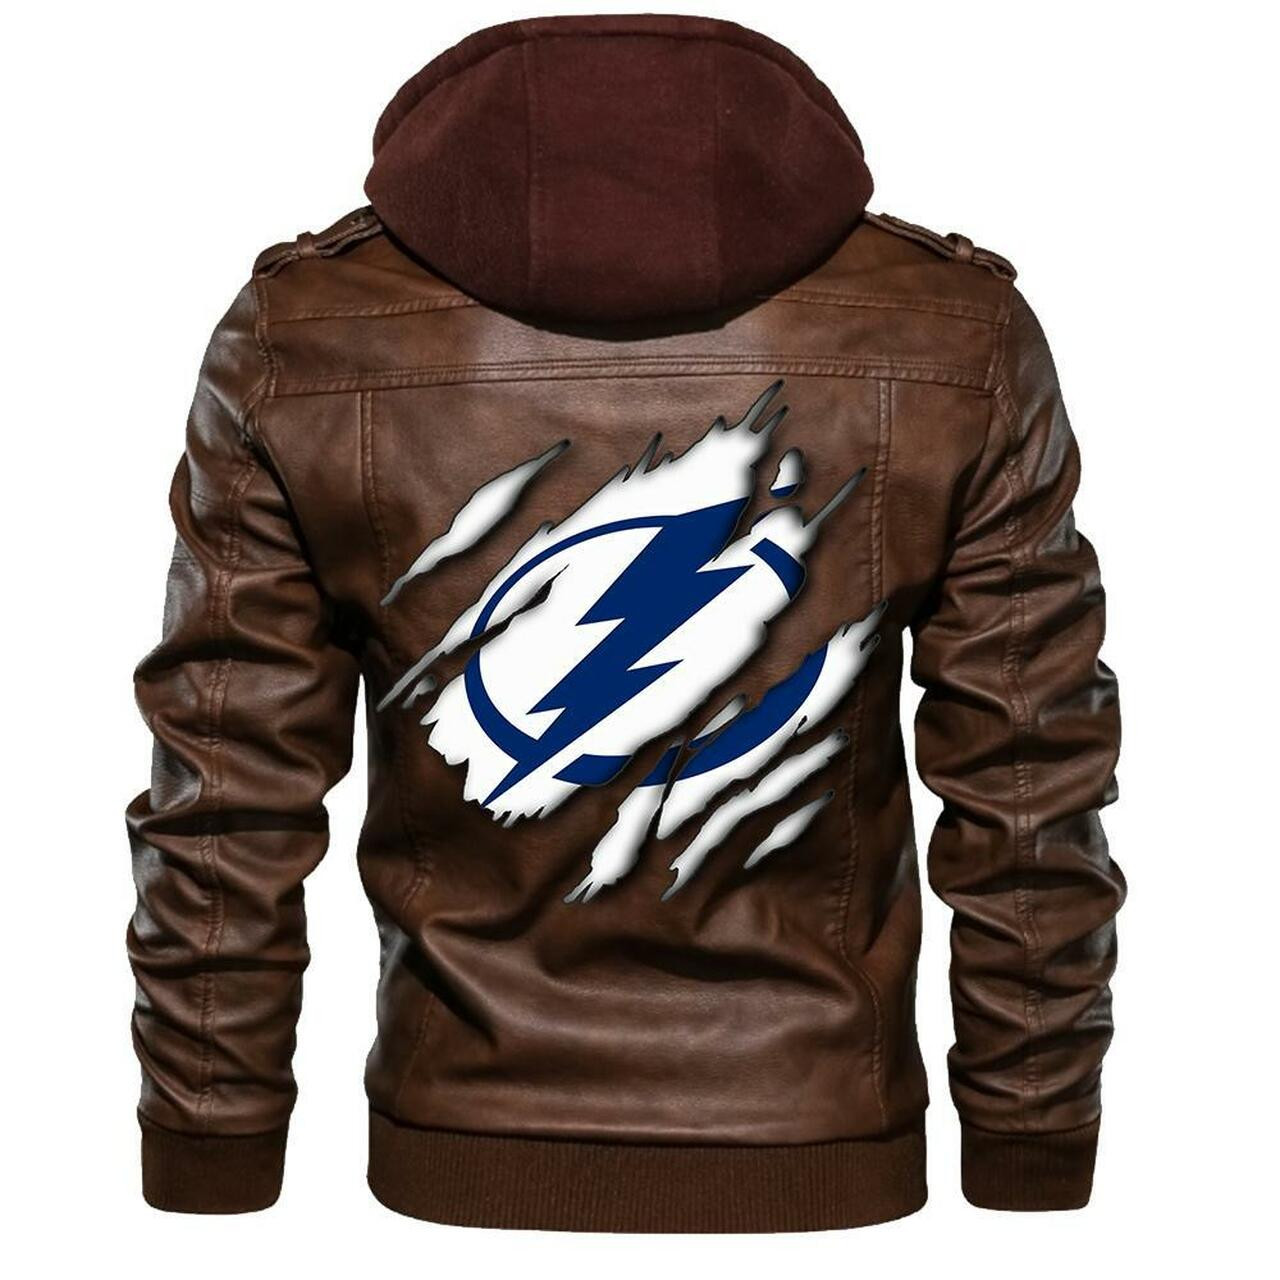 You can find Leather Jacket online at a great price 43